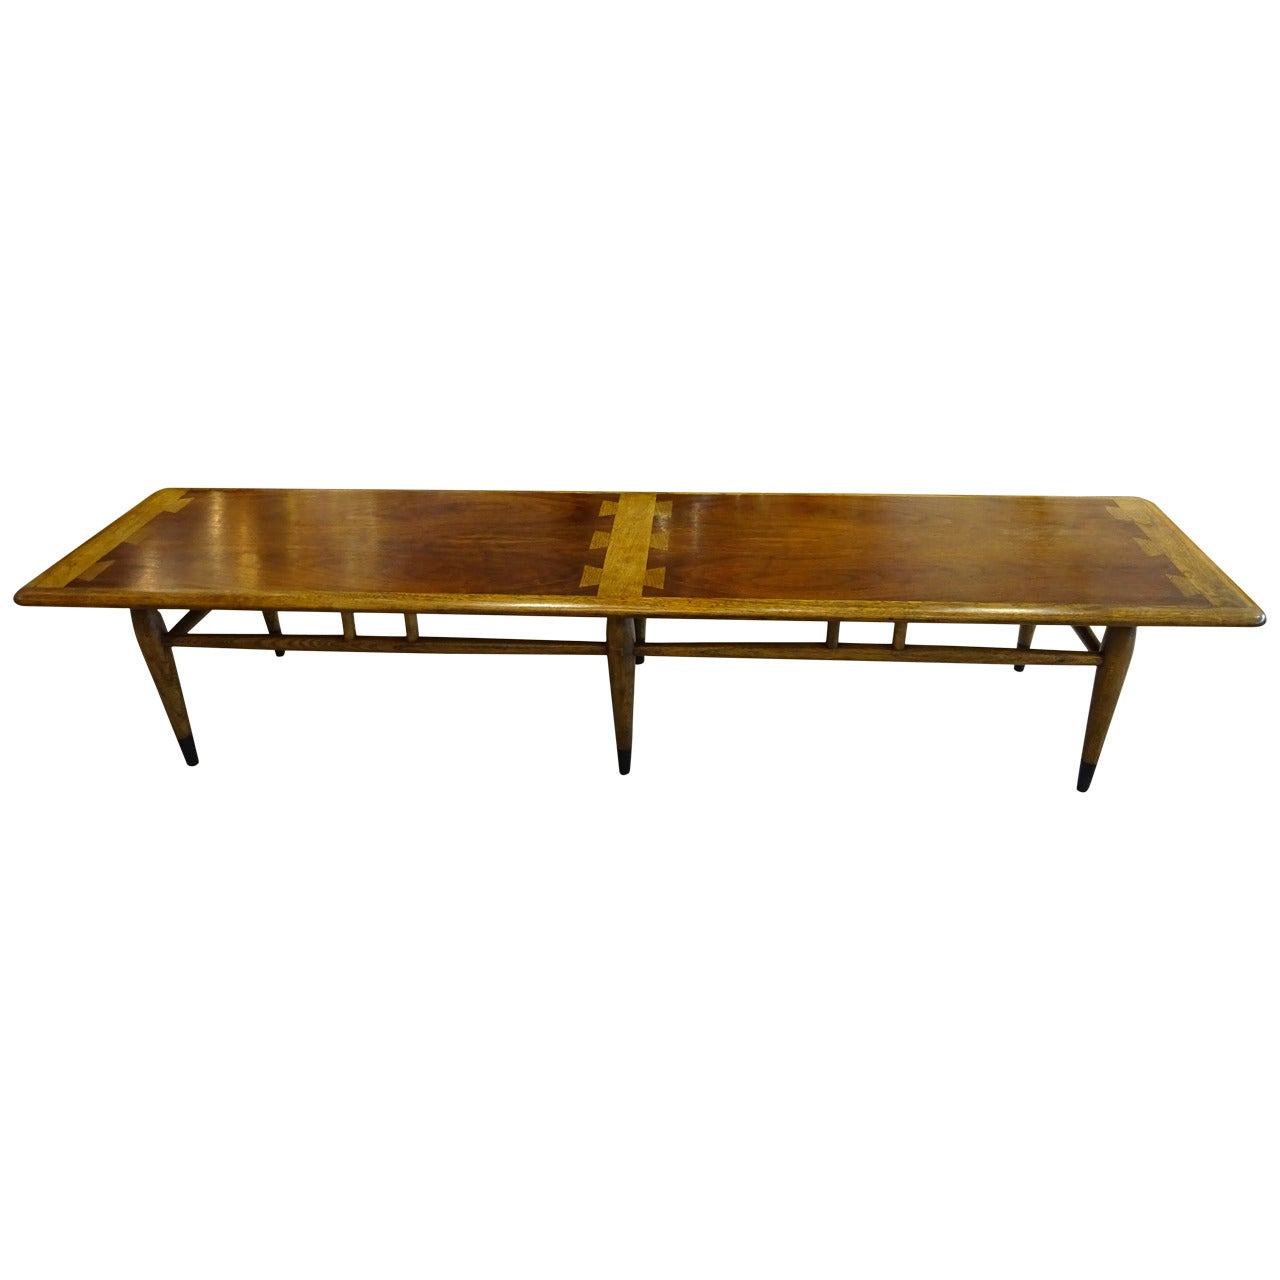 Extra Long Lane Dovetail Coffee Table